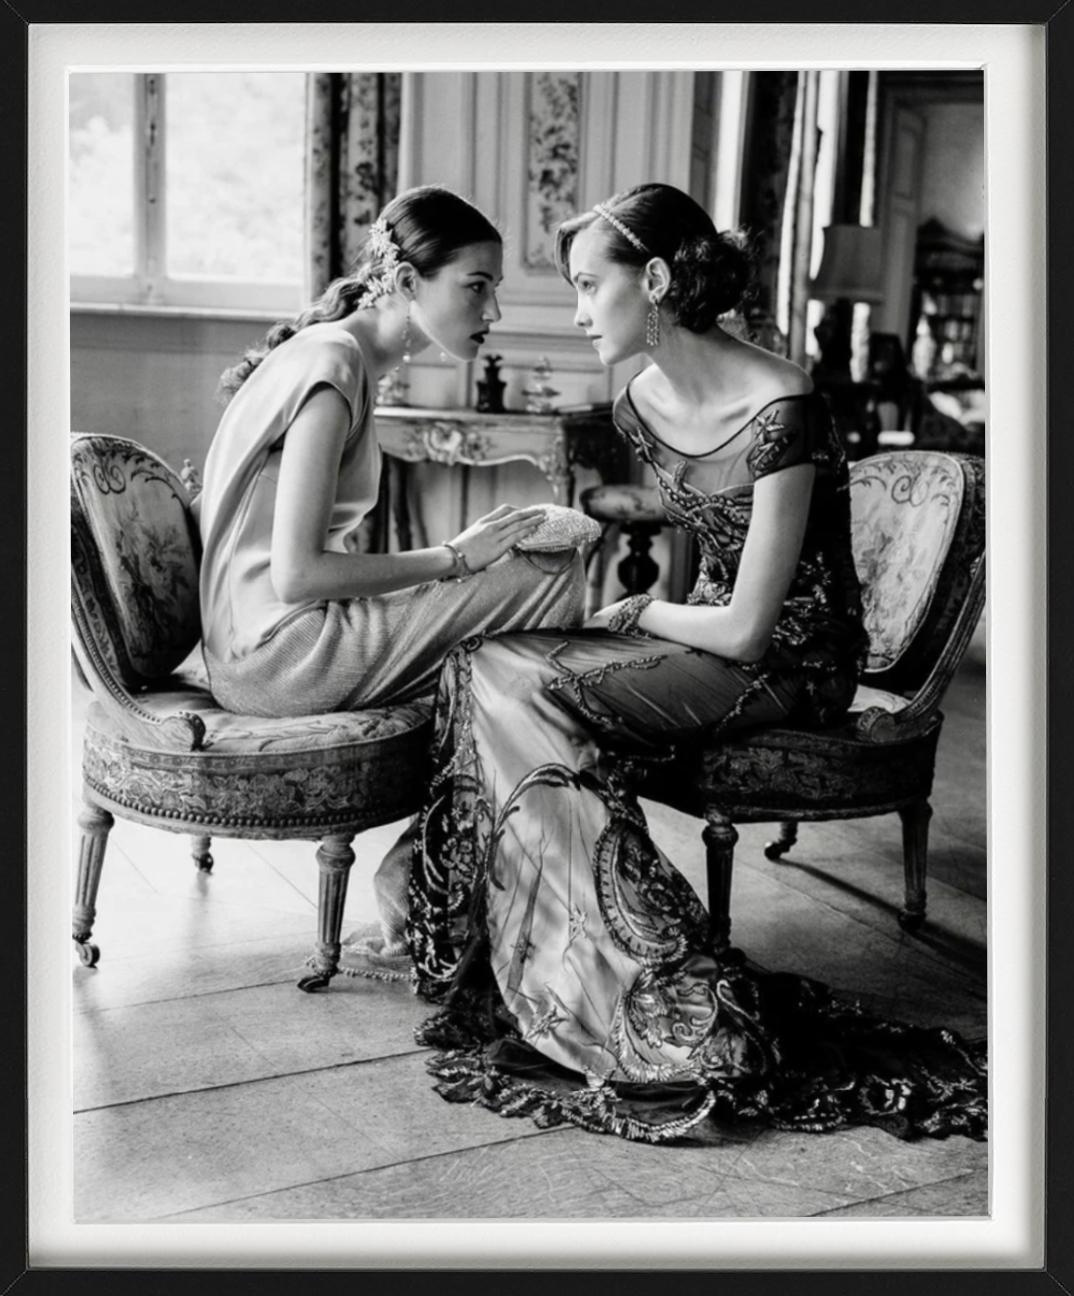 Haylynn and Lida - Models sitting in Baroque interior, fine art photography 1998 - Photograph by Arthur Elgort